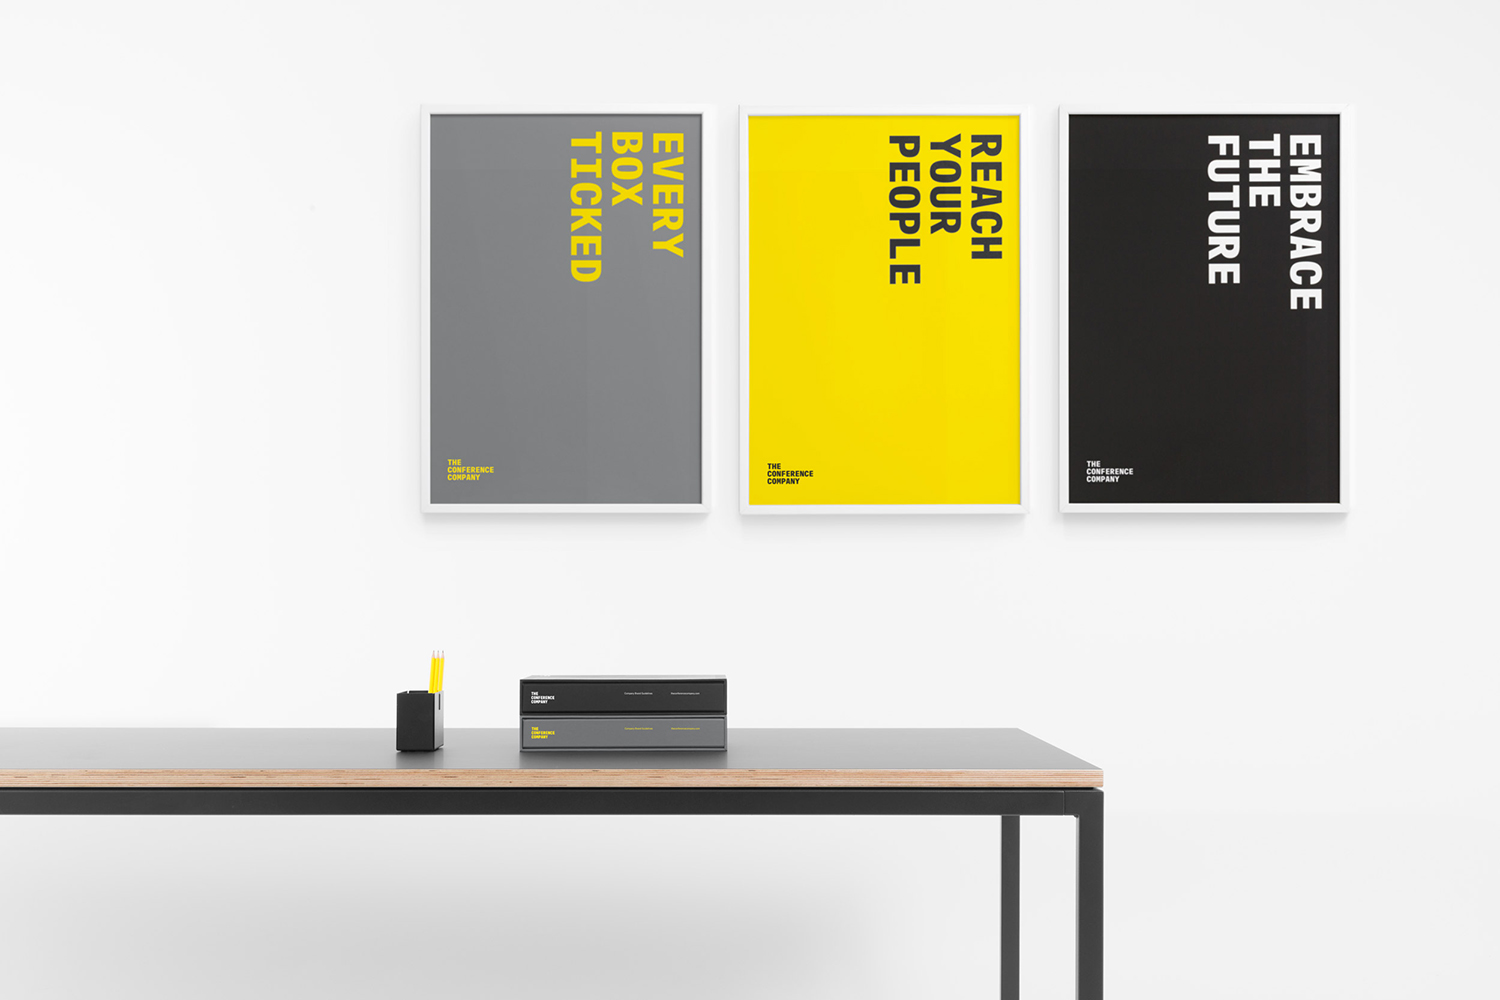 Logotype, print, brand guidelines and signage by Studio South for The Conference Company and The Awards Company